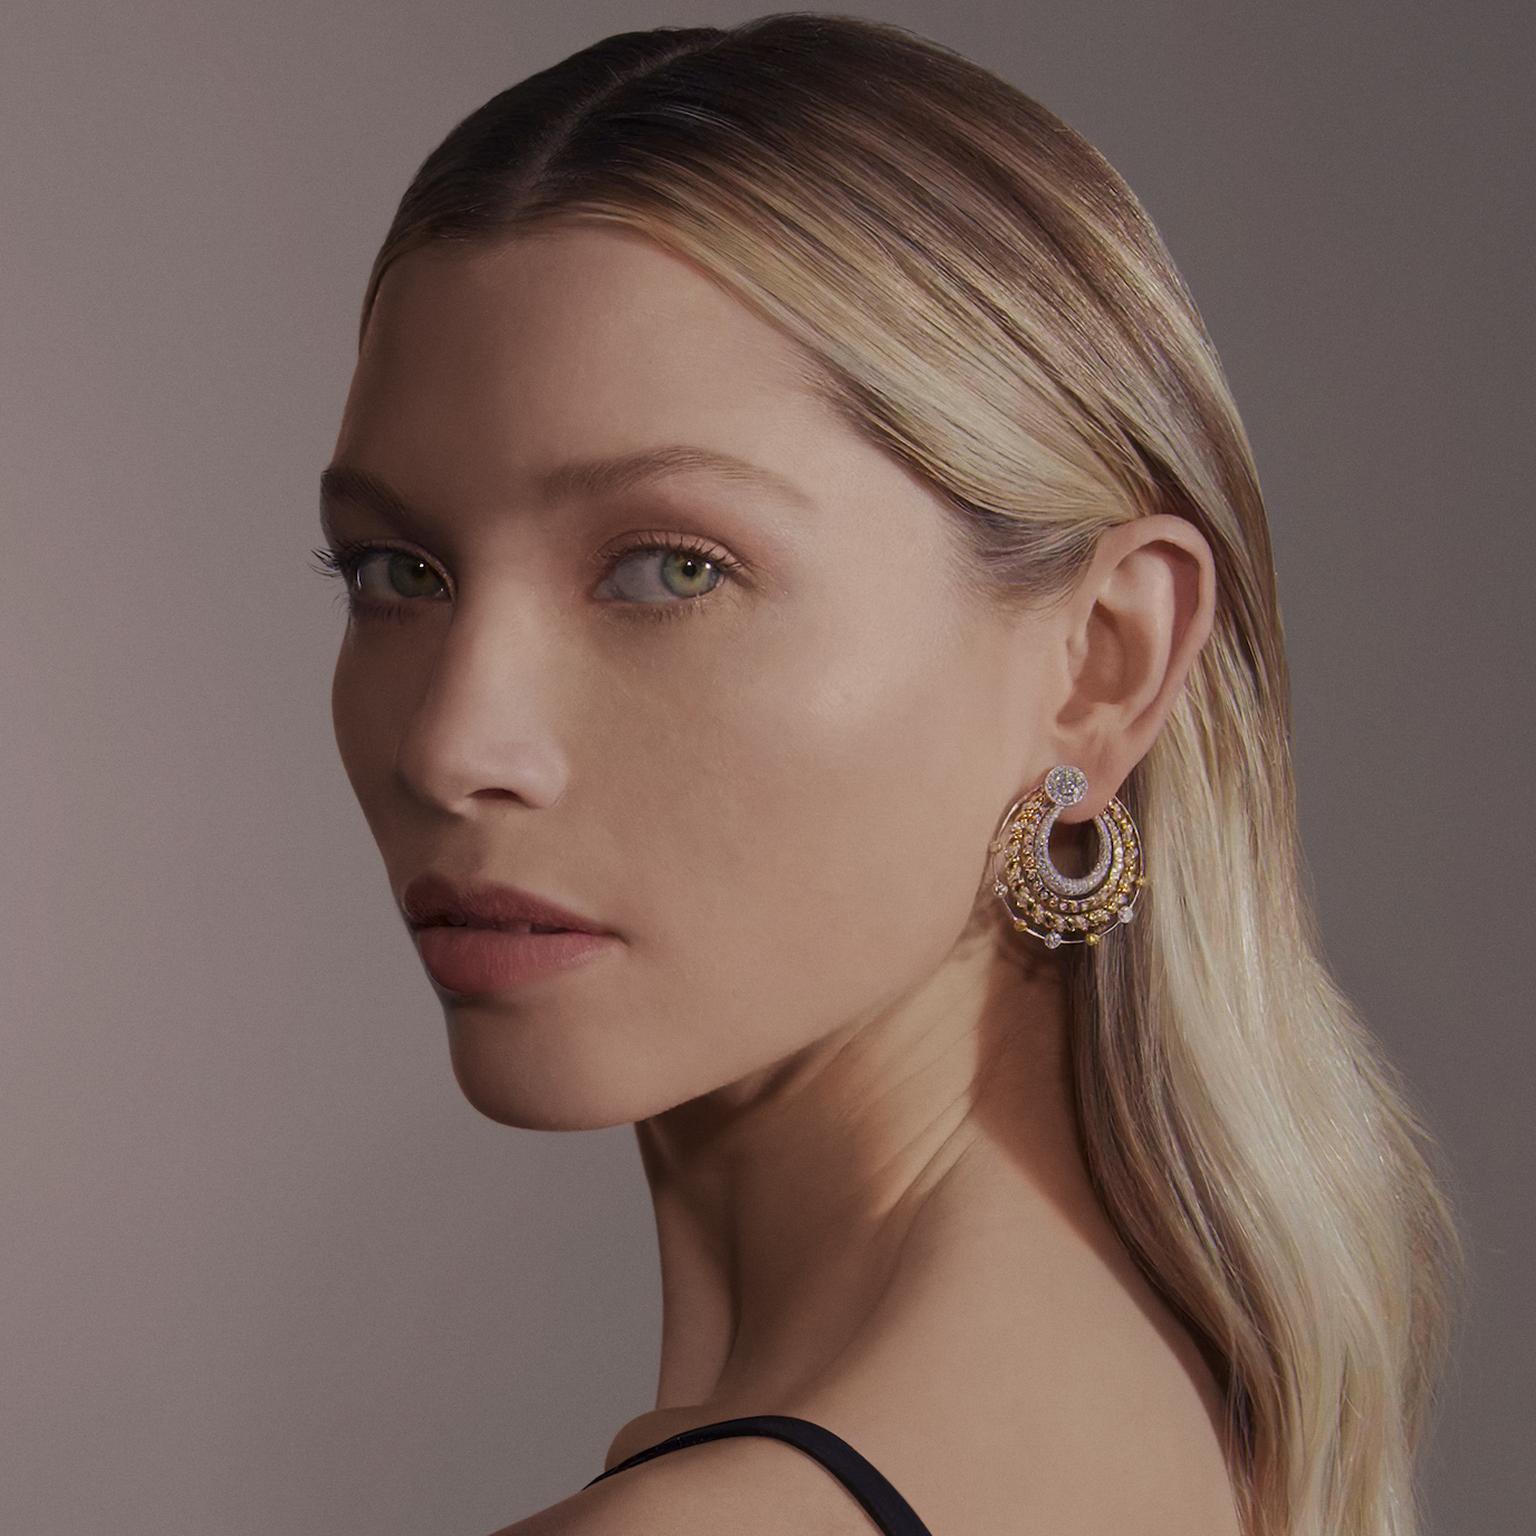 The Rest of De Beers' 2022 High Jewelry Collection Is Here